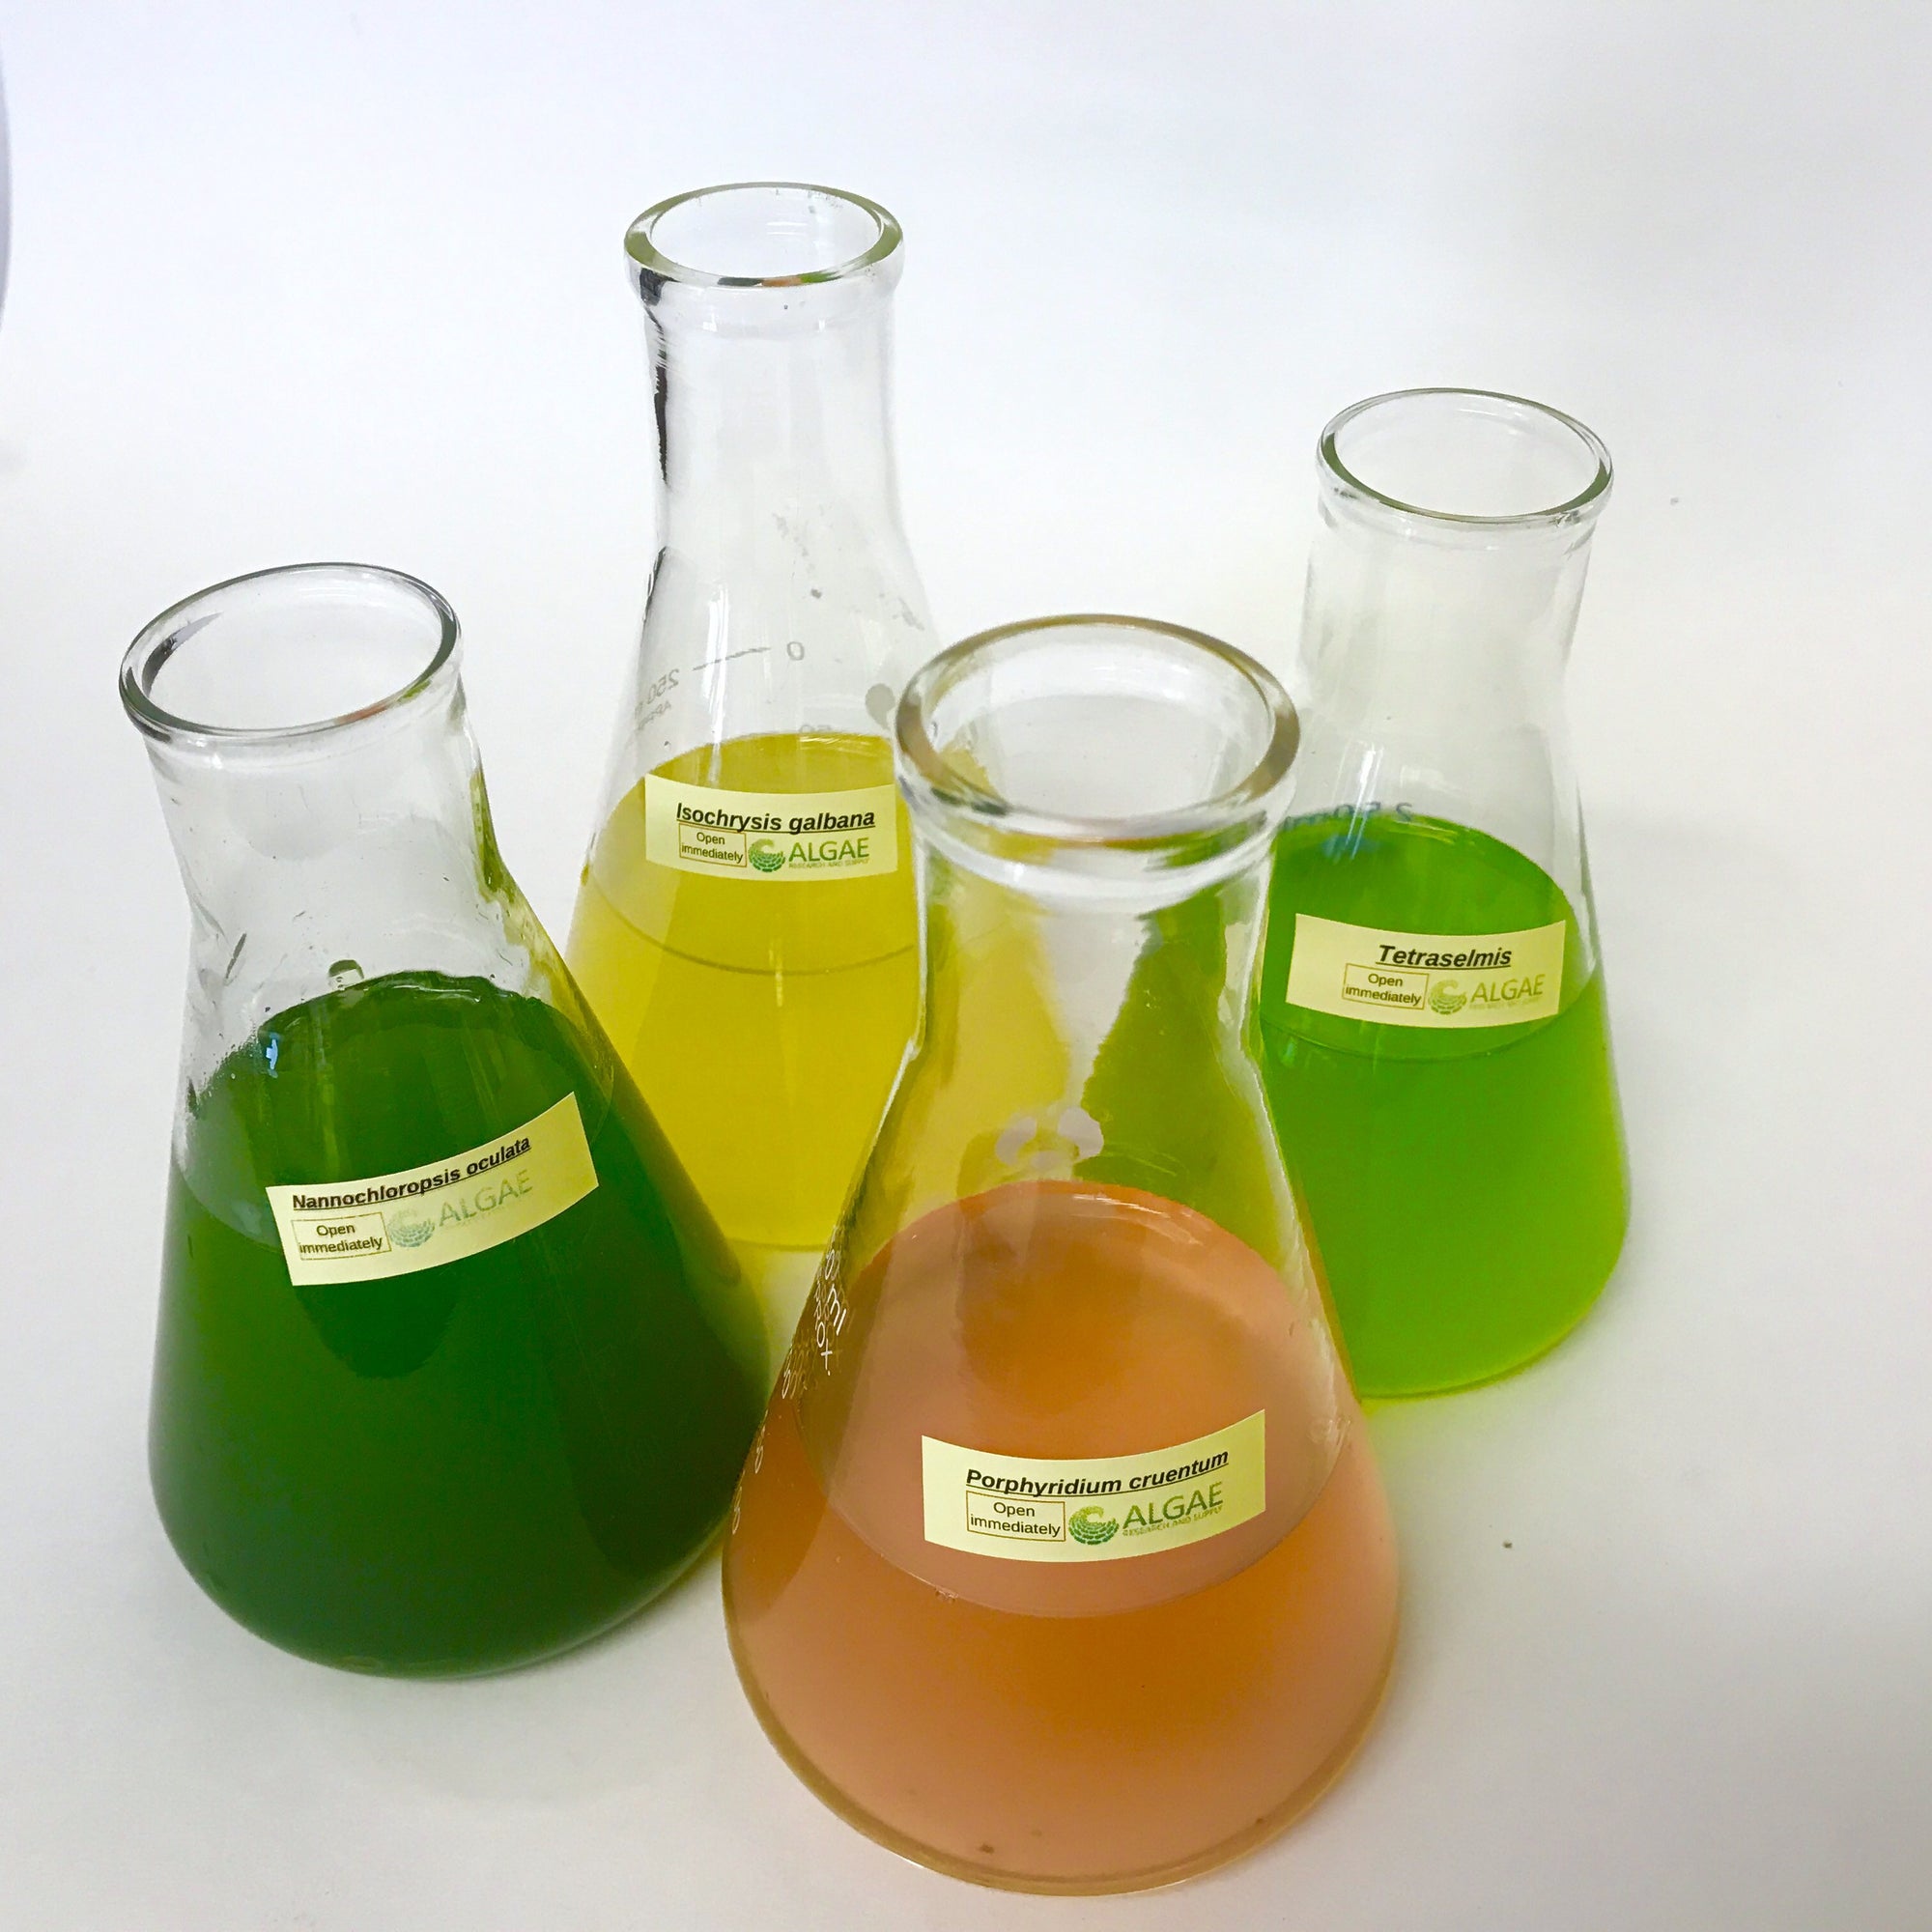 Filter Feeder Formula of microalgae is a blend of four Live Phytoplankton species.